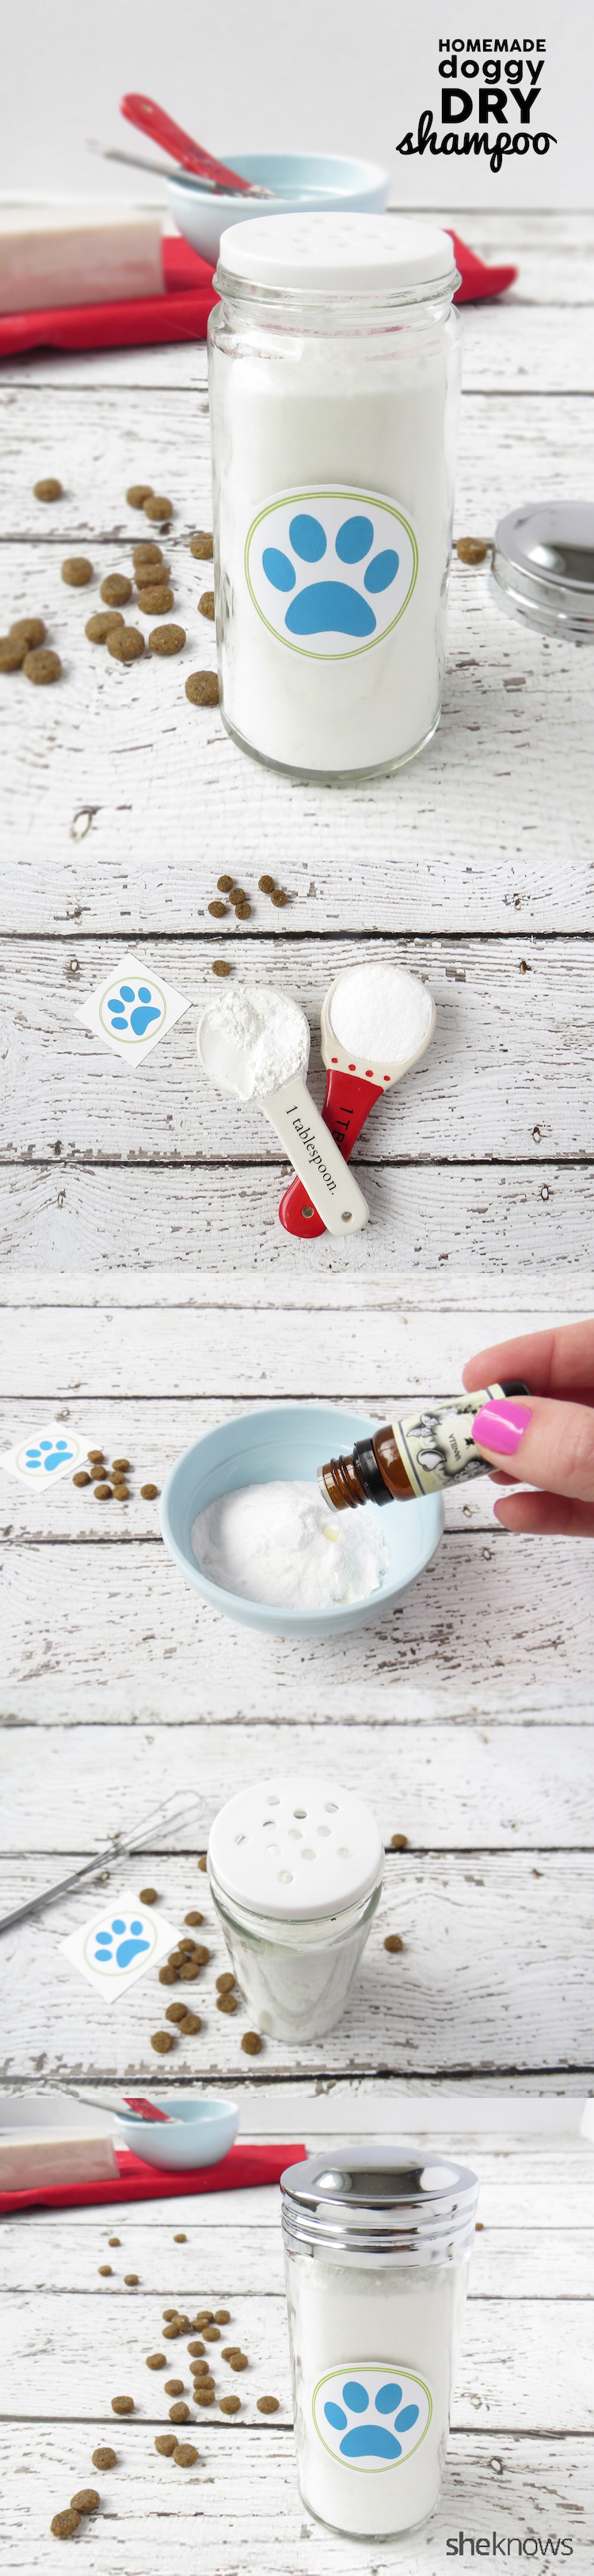 How to make a Dry Shampoo for Dogs with just 3 simple ingredients. Great to use in between dog baths!